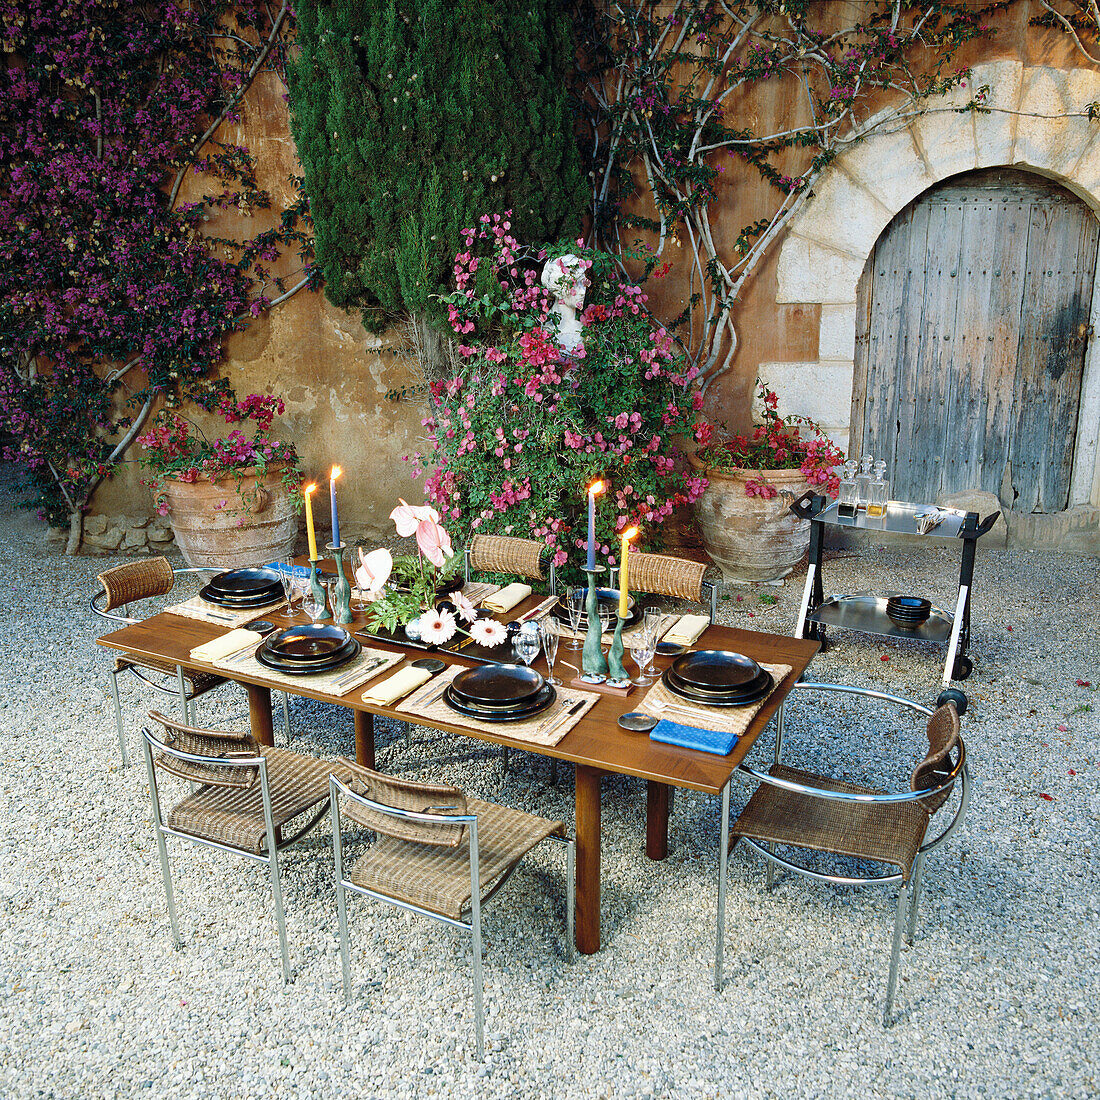 Table and chairs in a courtyard.